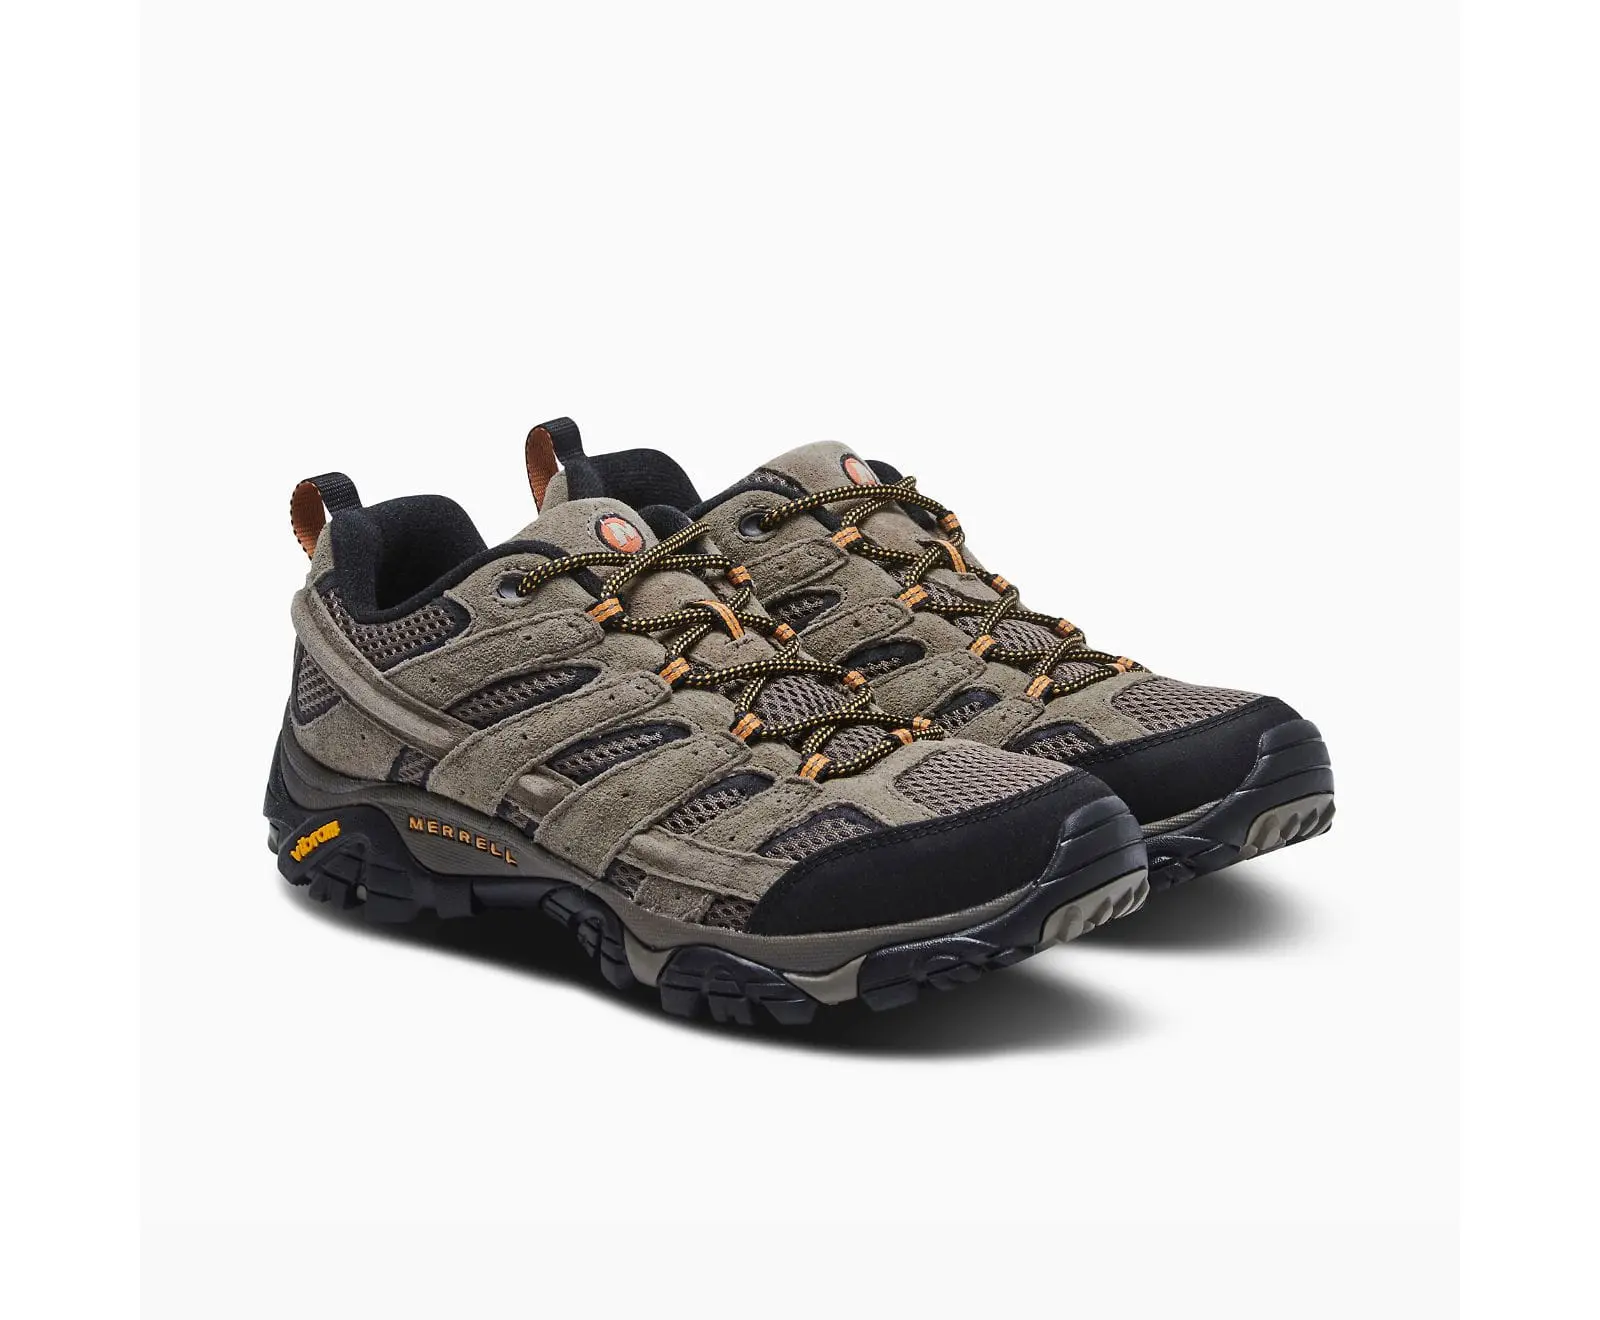 Moab 2 Ventilator Shoes: The Disc Golfer's Choice for Comfort on the Course